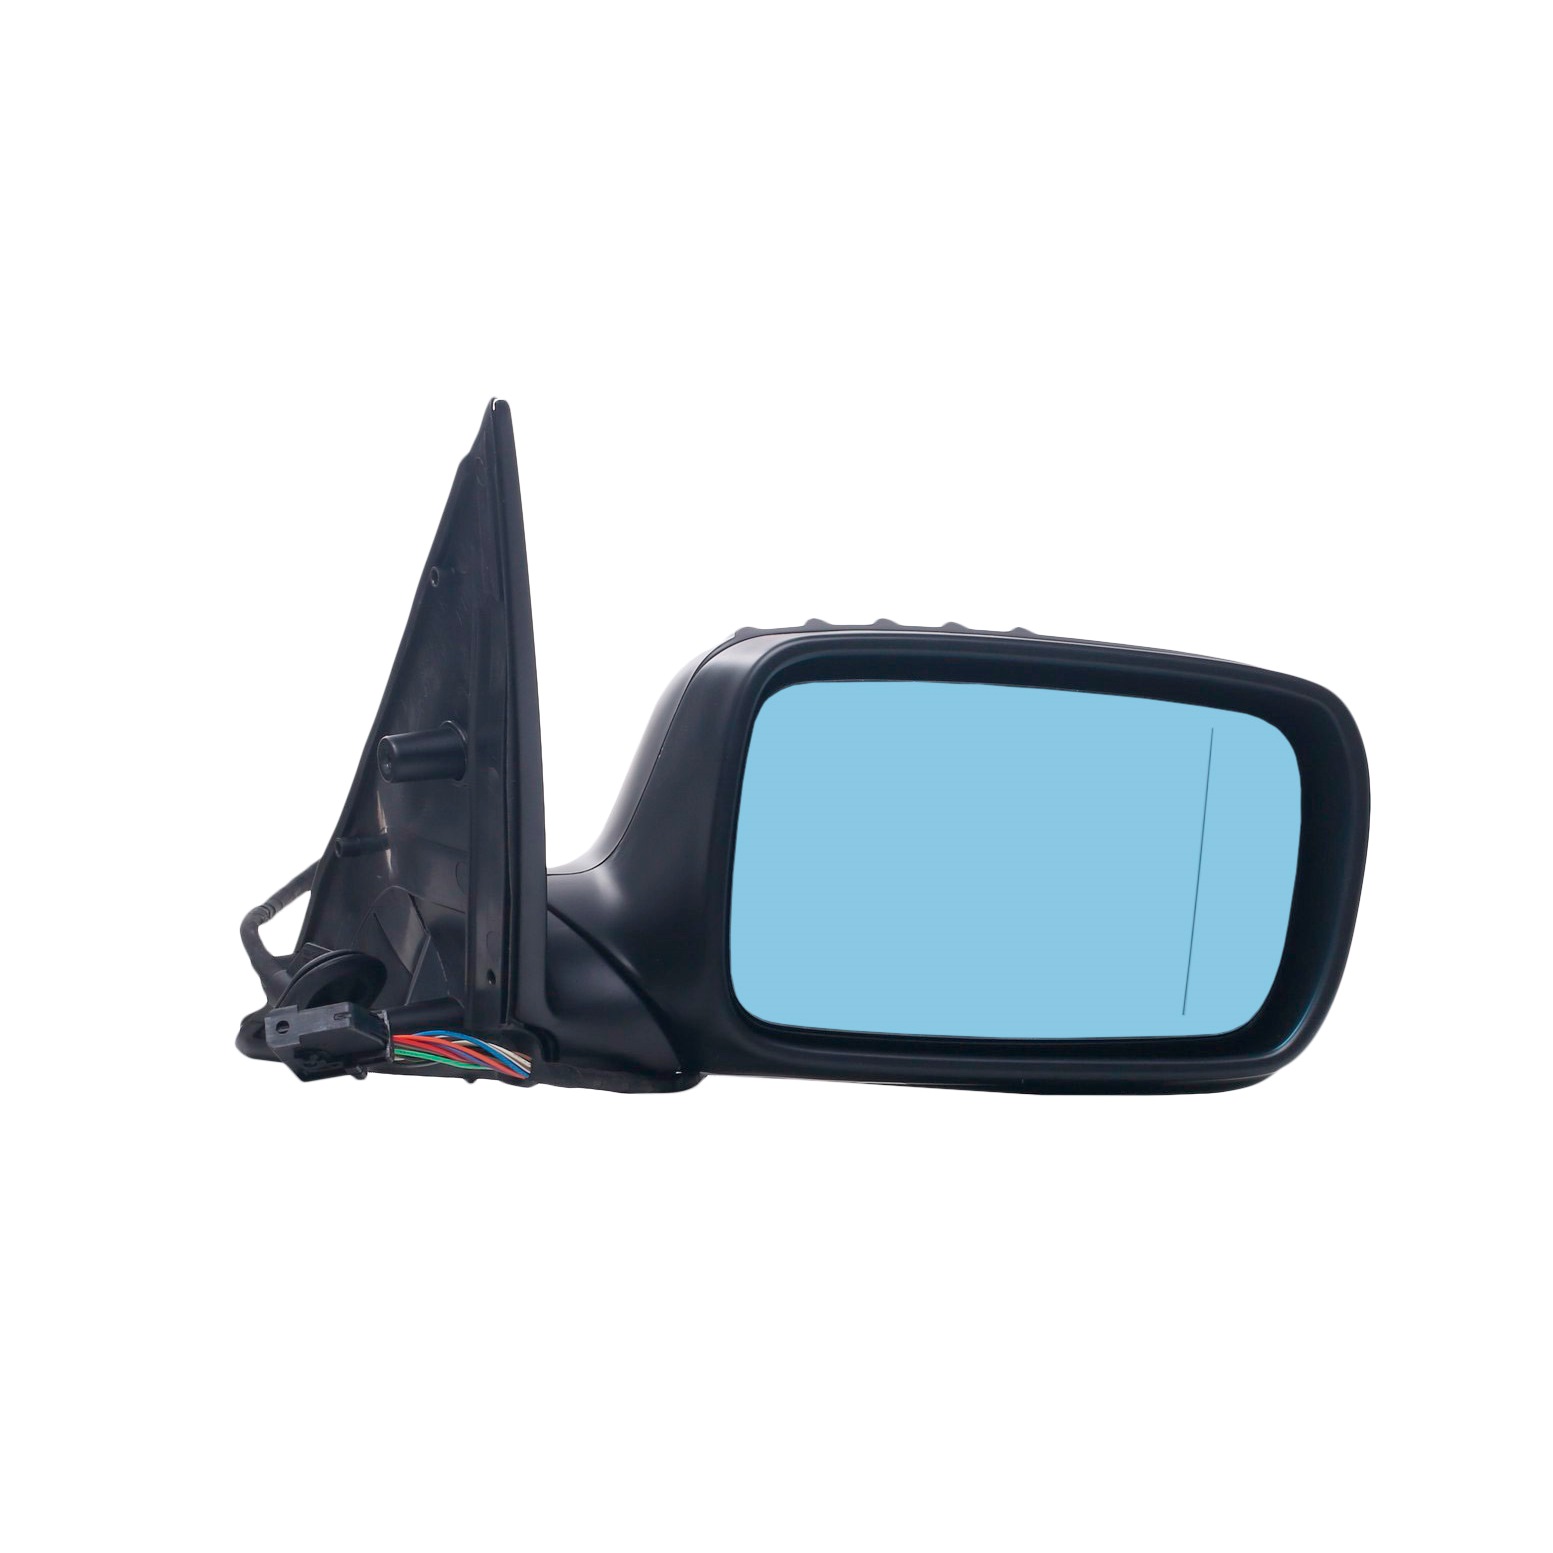 STARK SKOM-1040495 Wing mirror BMW experience and price